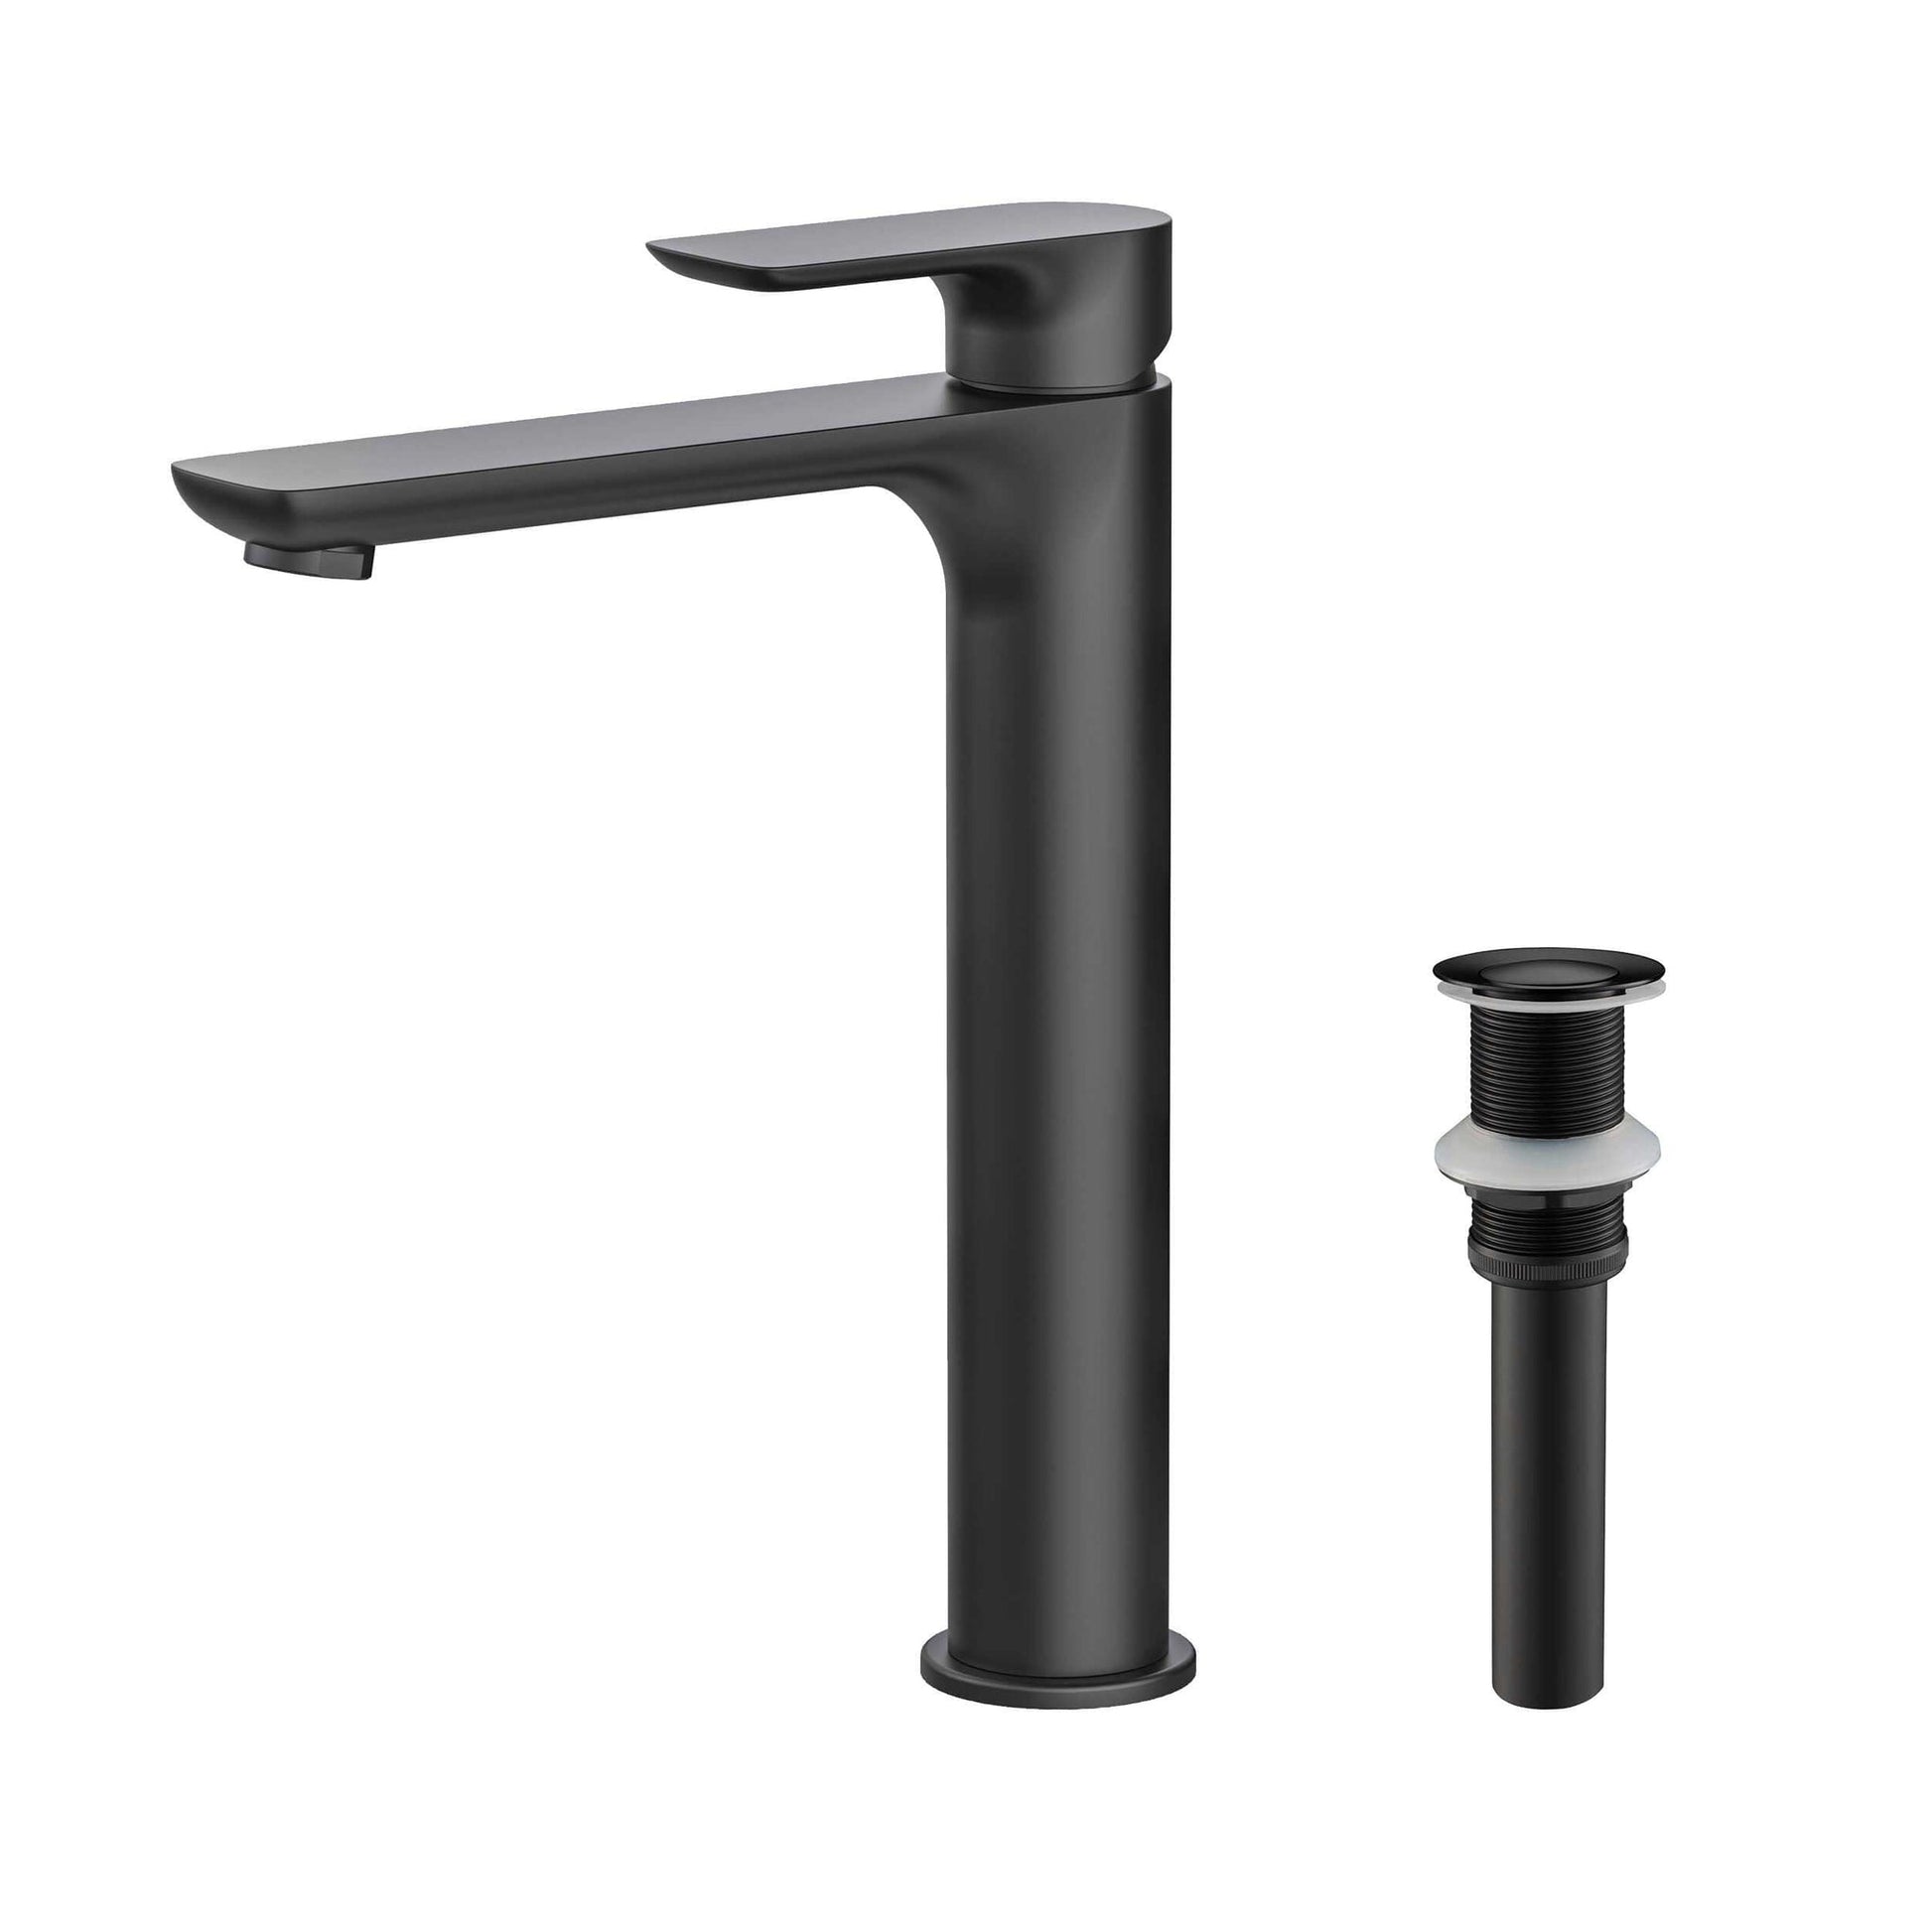 KIBI Tender-T Single Handle Matte Black Solid Brass Bathroom Vessel Sink Faucet With Pop-Up Drain Stopper Small Cover Without Overflow